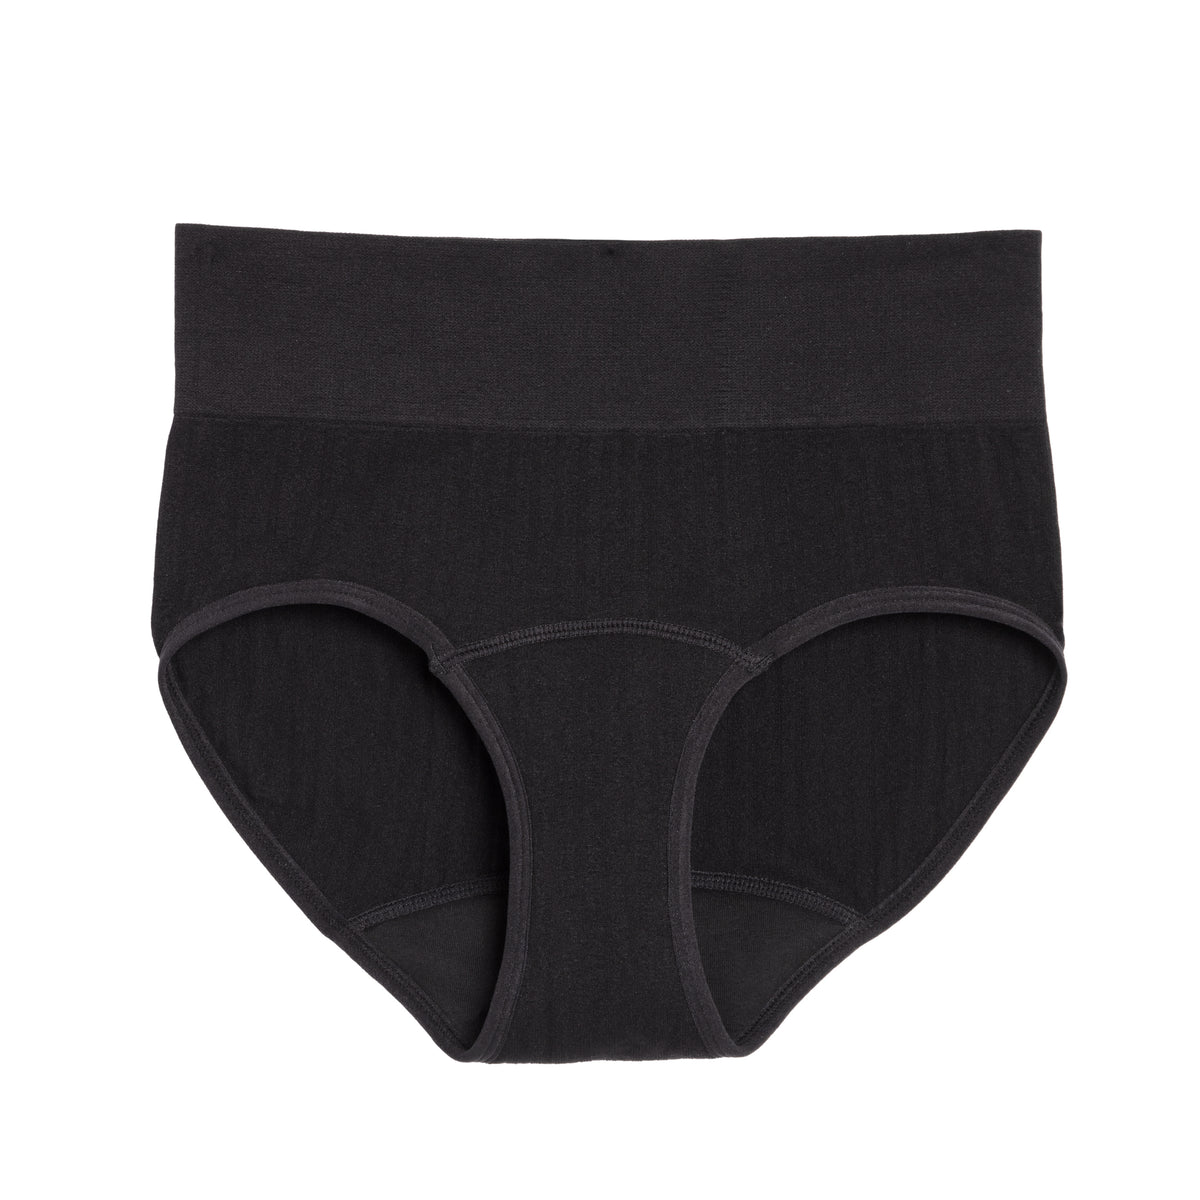 Thinx Hiphugger Leakproof Period Panties Size S Black NWT